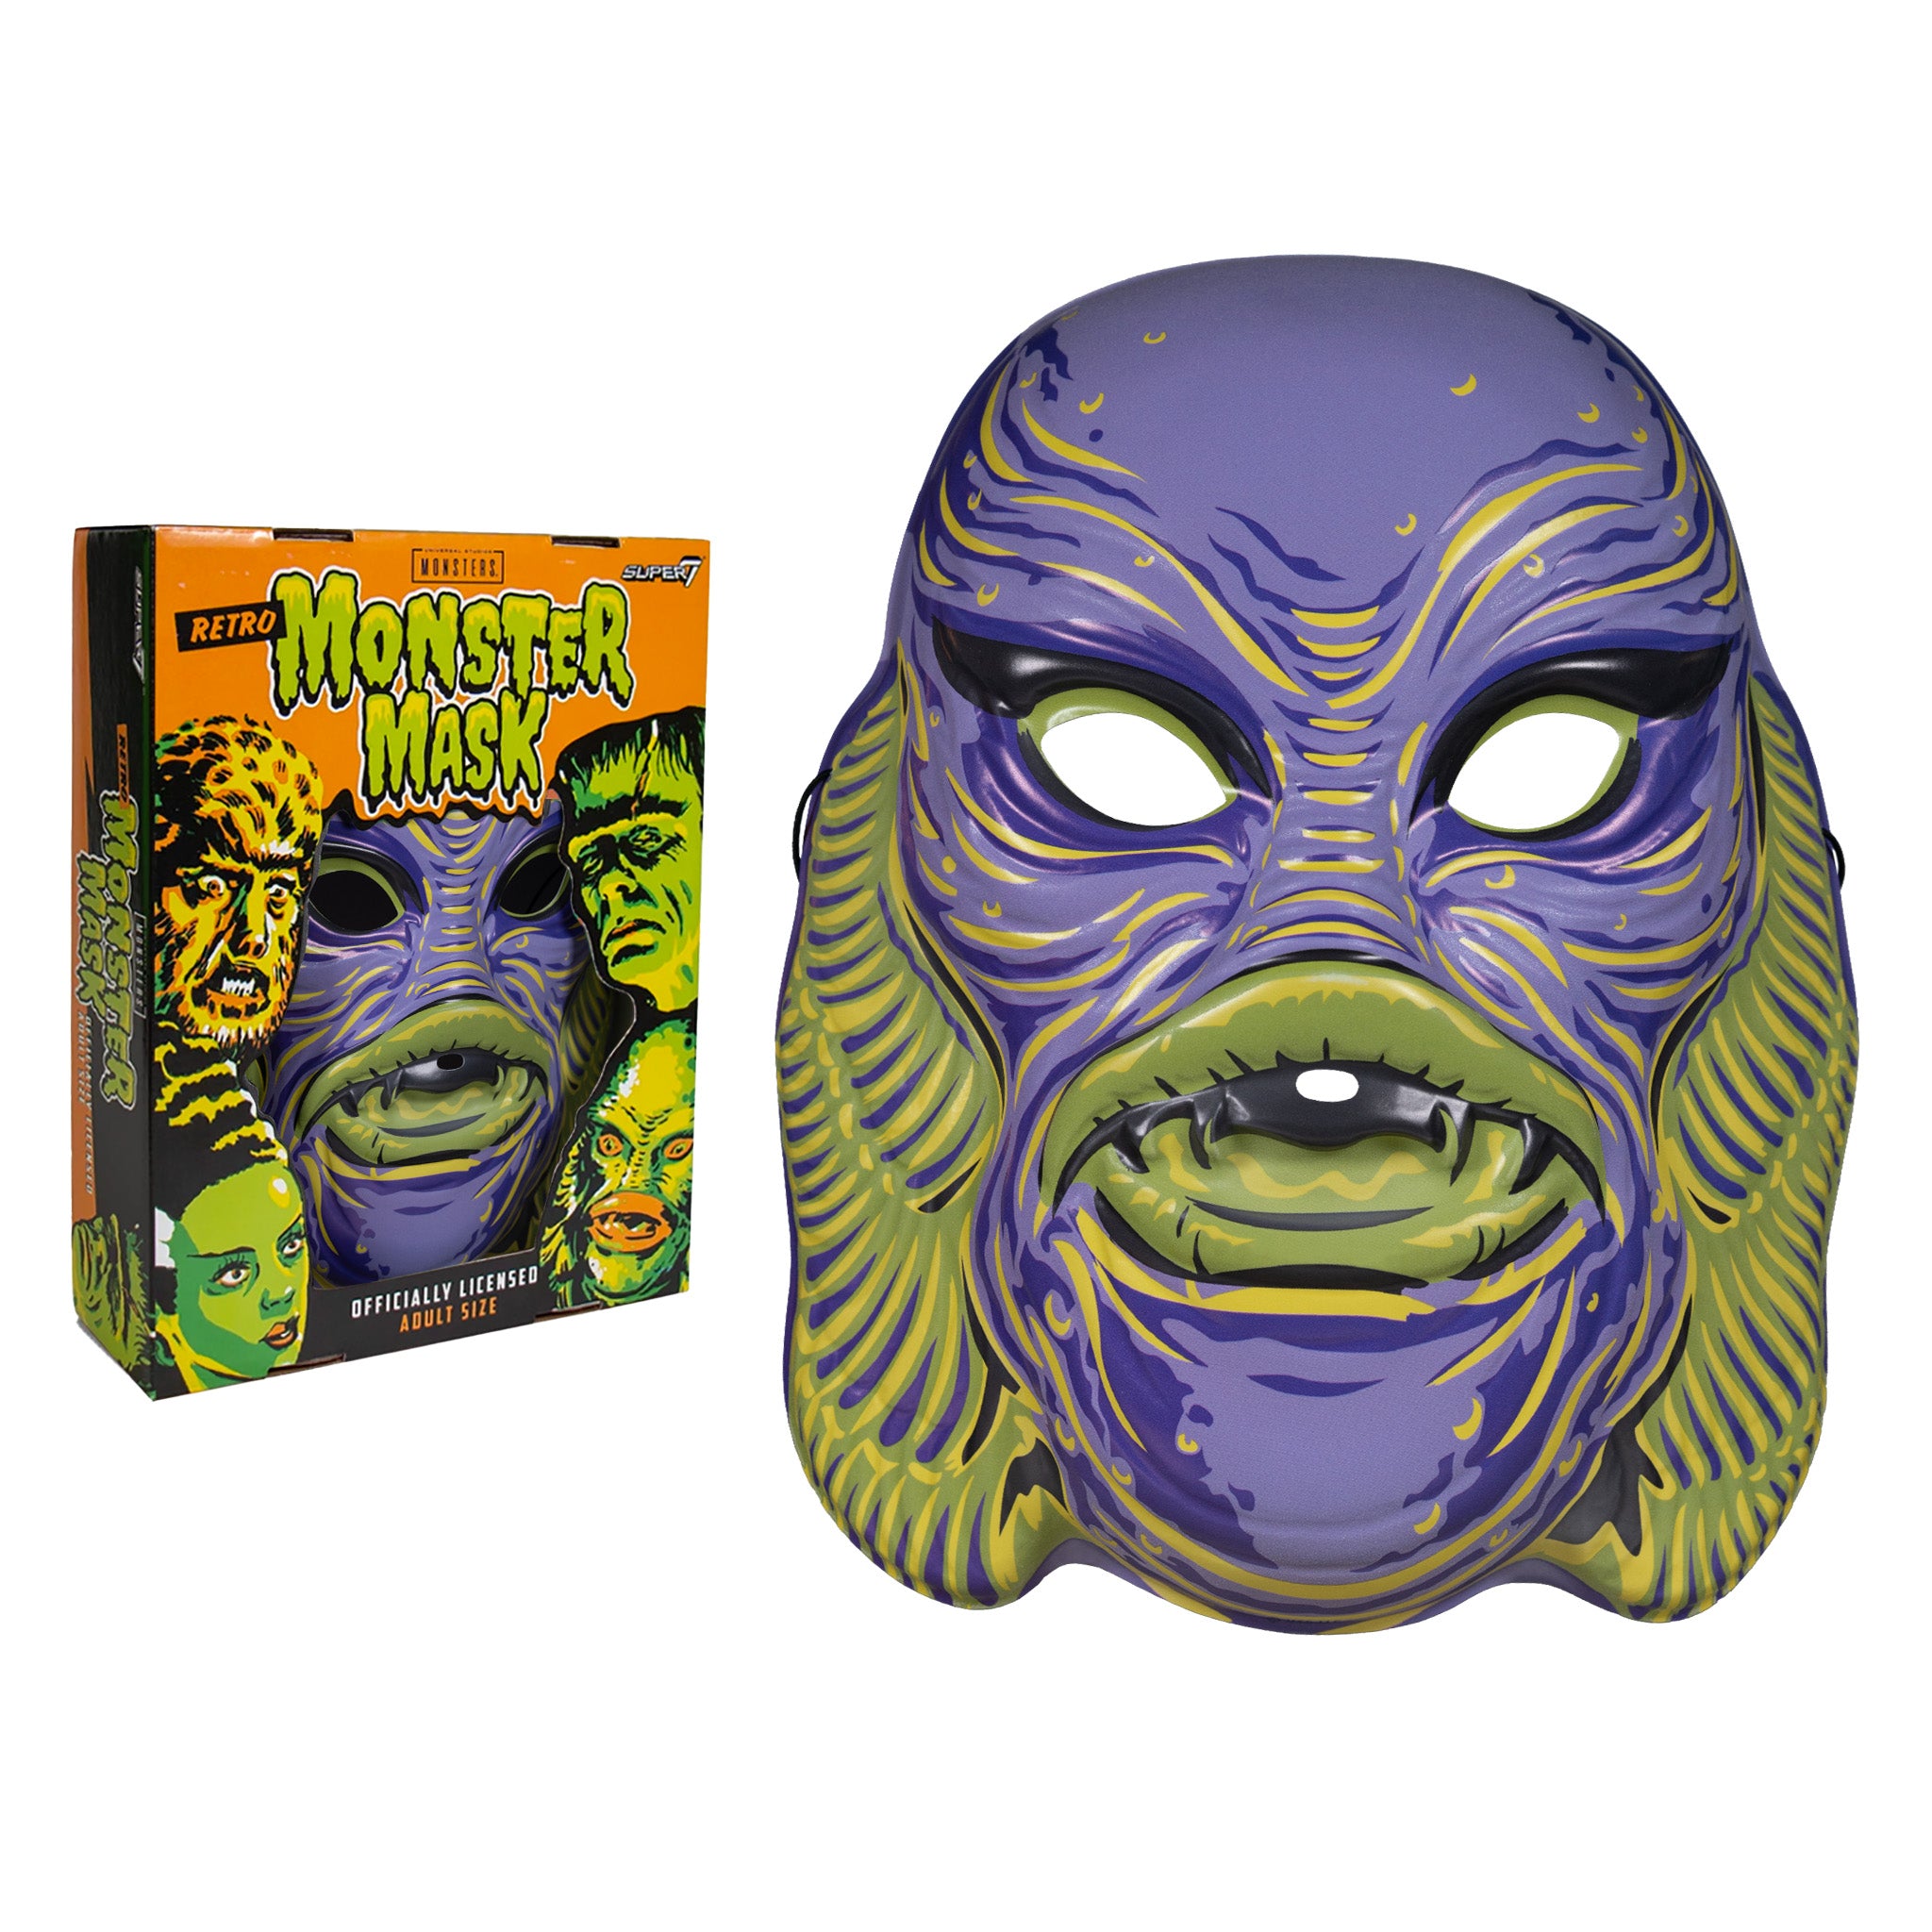 Universal Monsters Mask - Creature from the Black Lagoon (Glow)